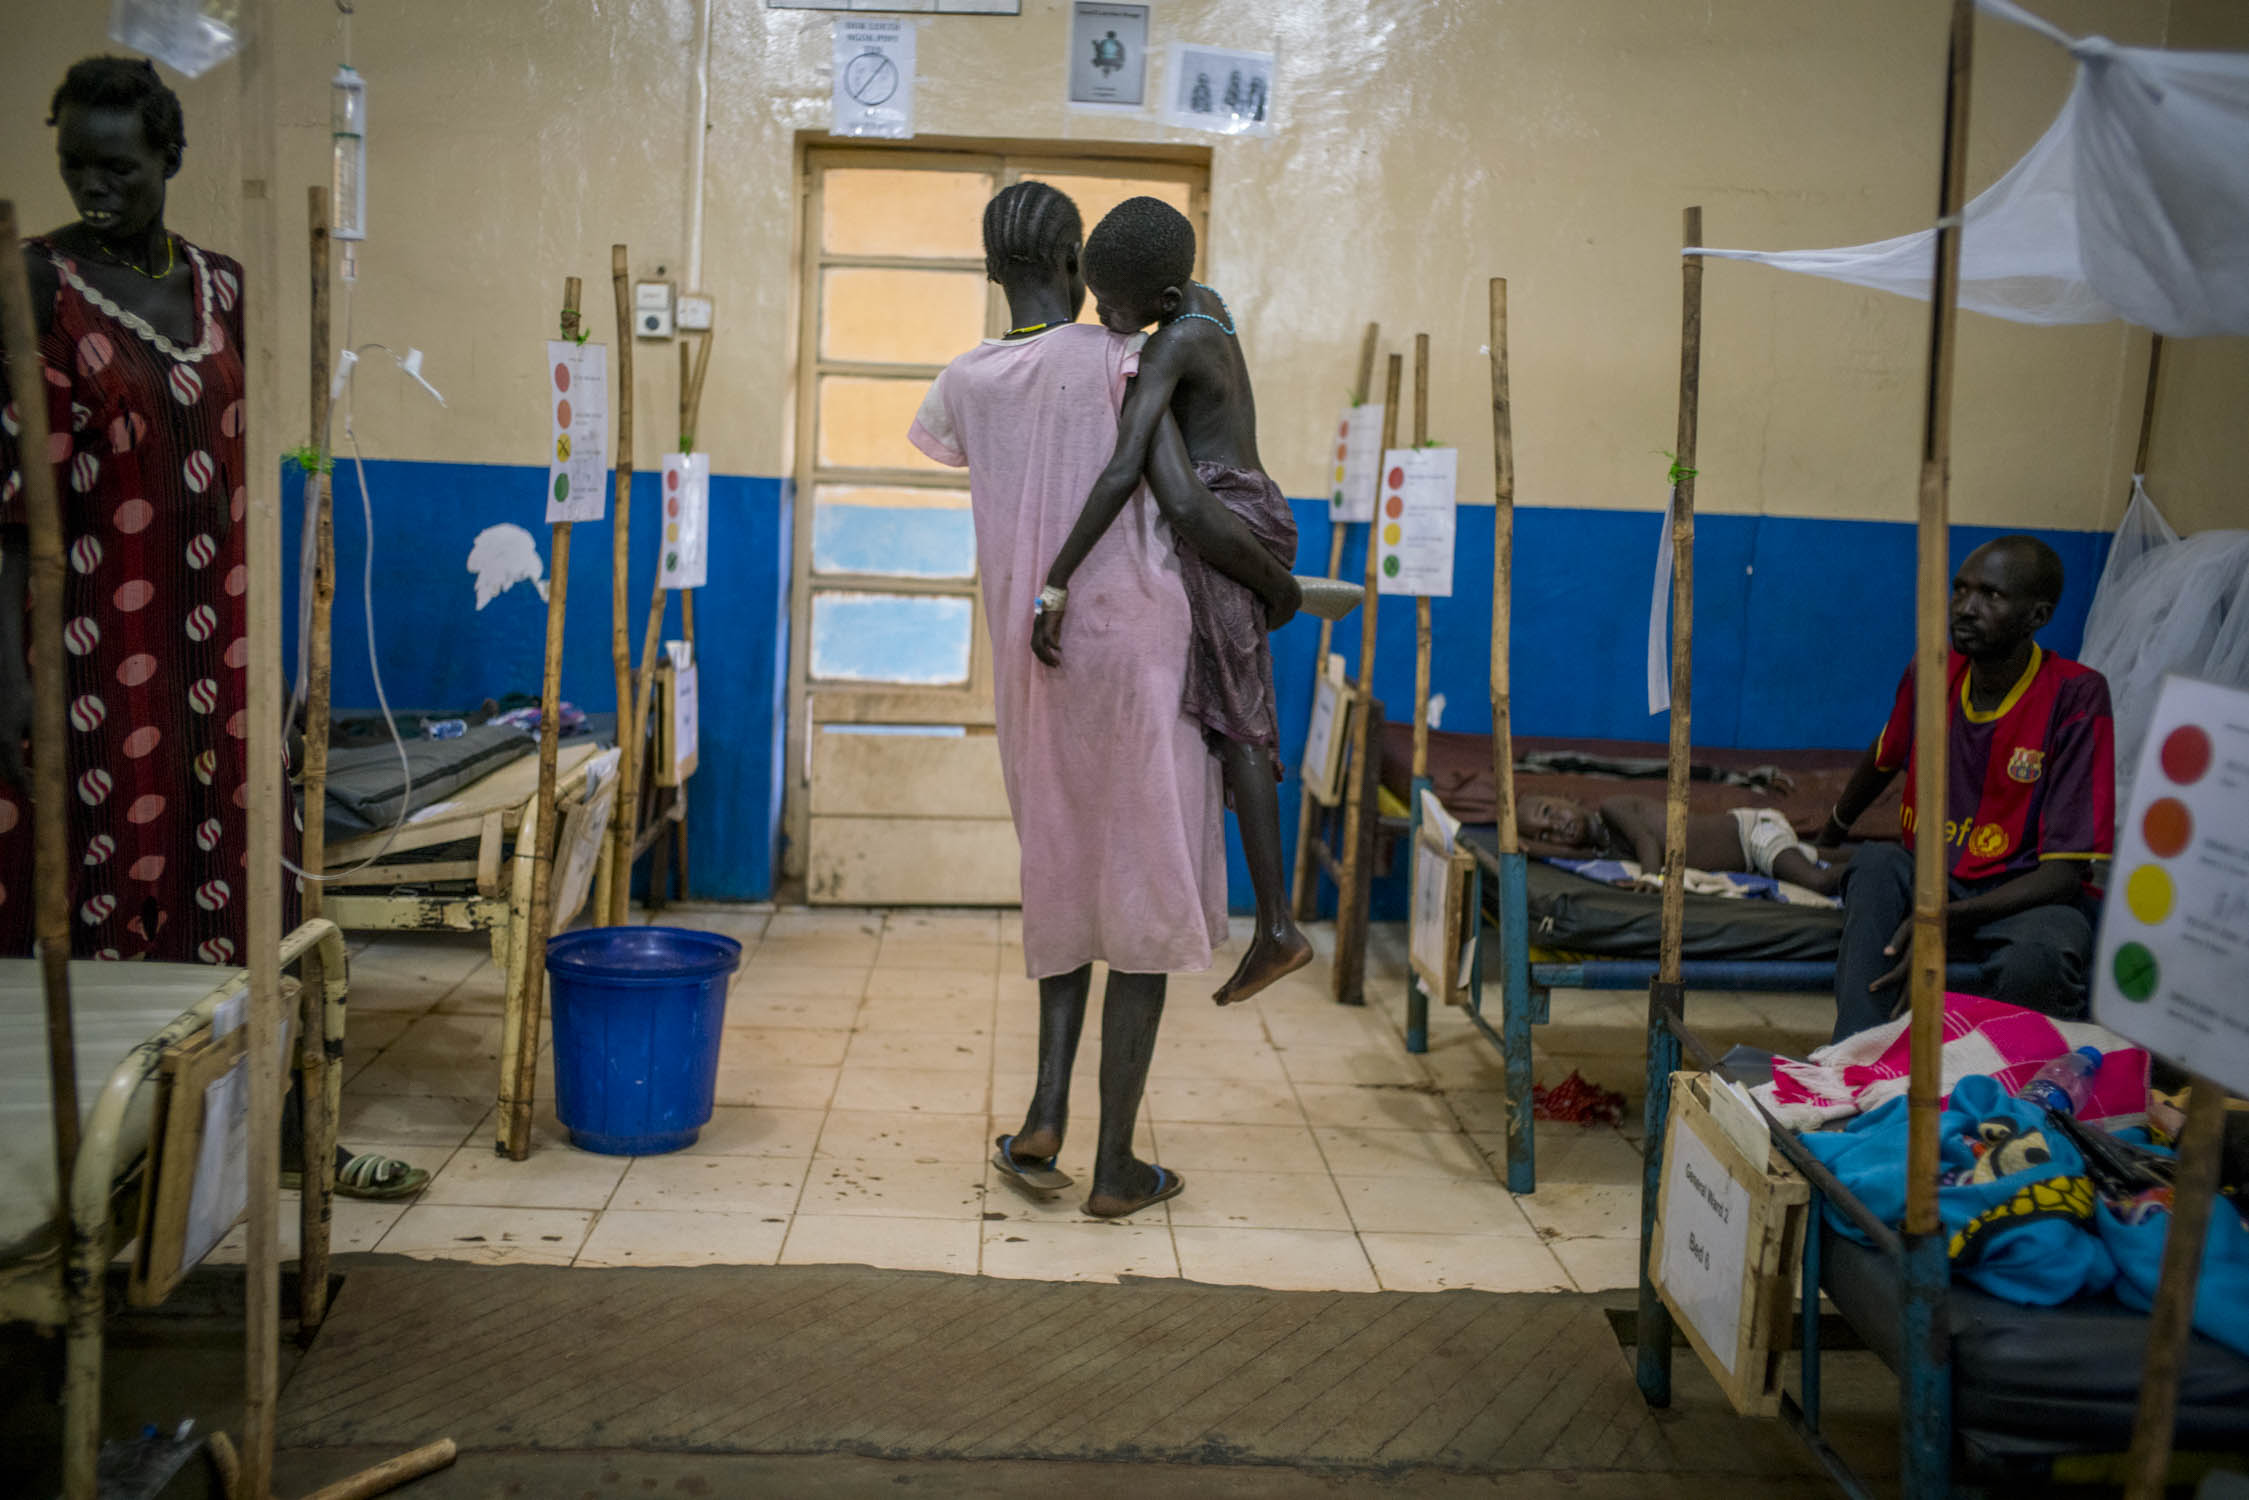  Aweng Diing Geng, 5, is carried back to her bed by her mother, who has just finished bathing her in the yard of the MSF hospital in Aweil, the main city in South Sudan's poorest state,&nbsp;Northern Bahr el Ghazal. Aweng is receiving treatment for s